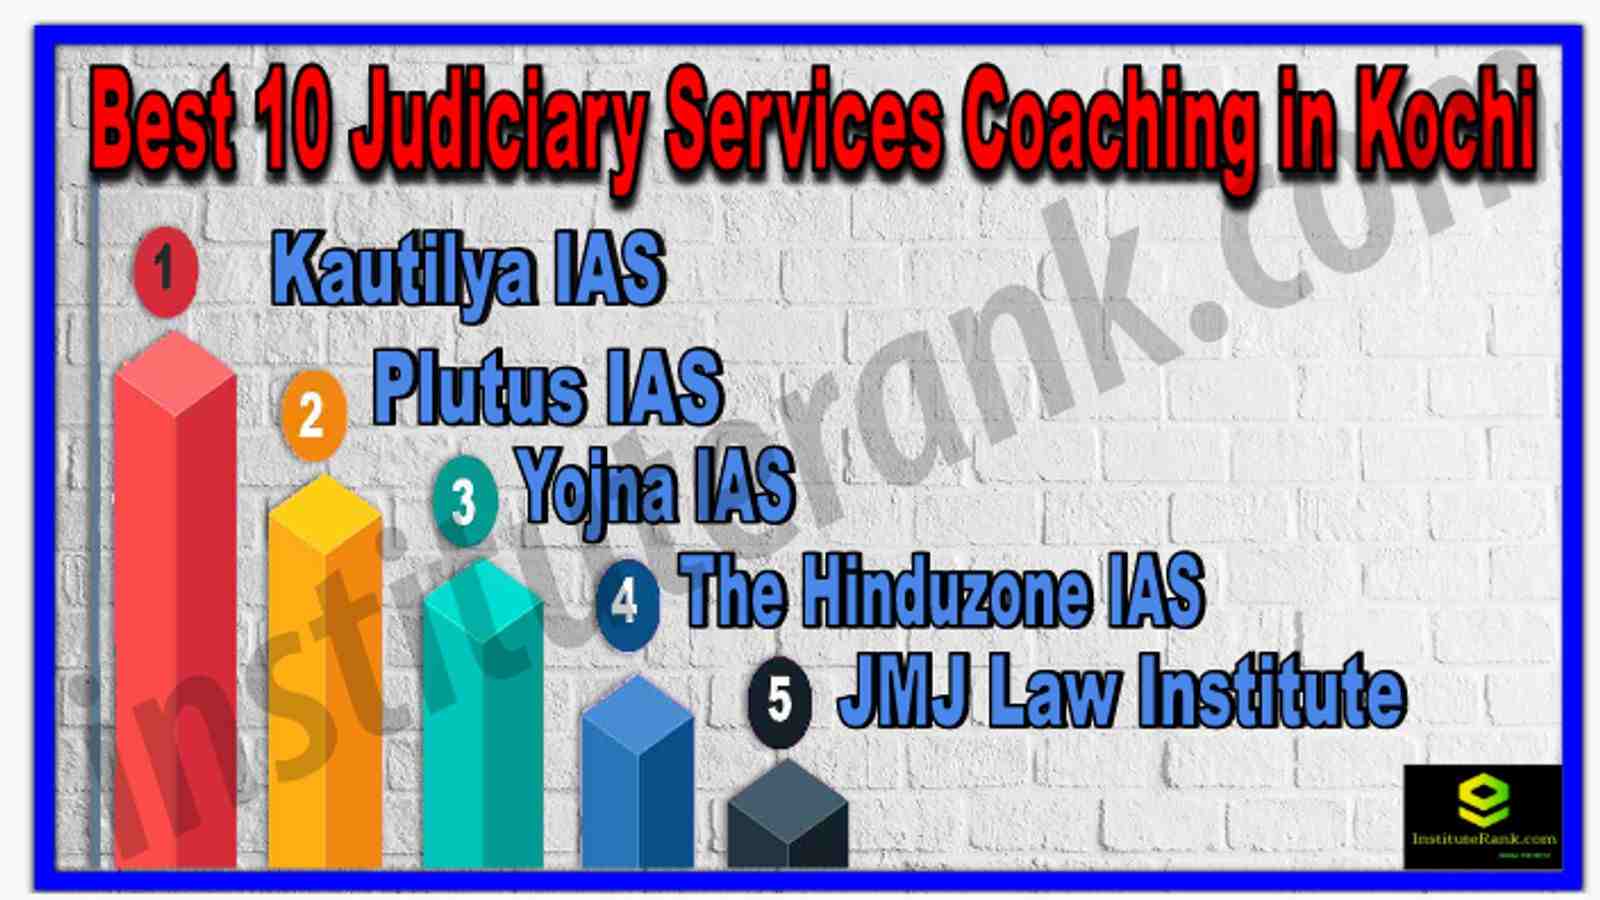 Best 10 Judiciary Services Coaching in Kochi